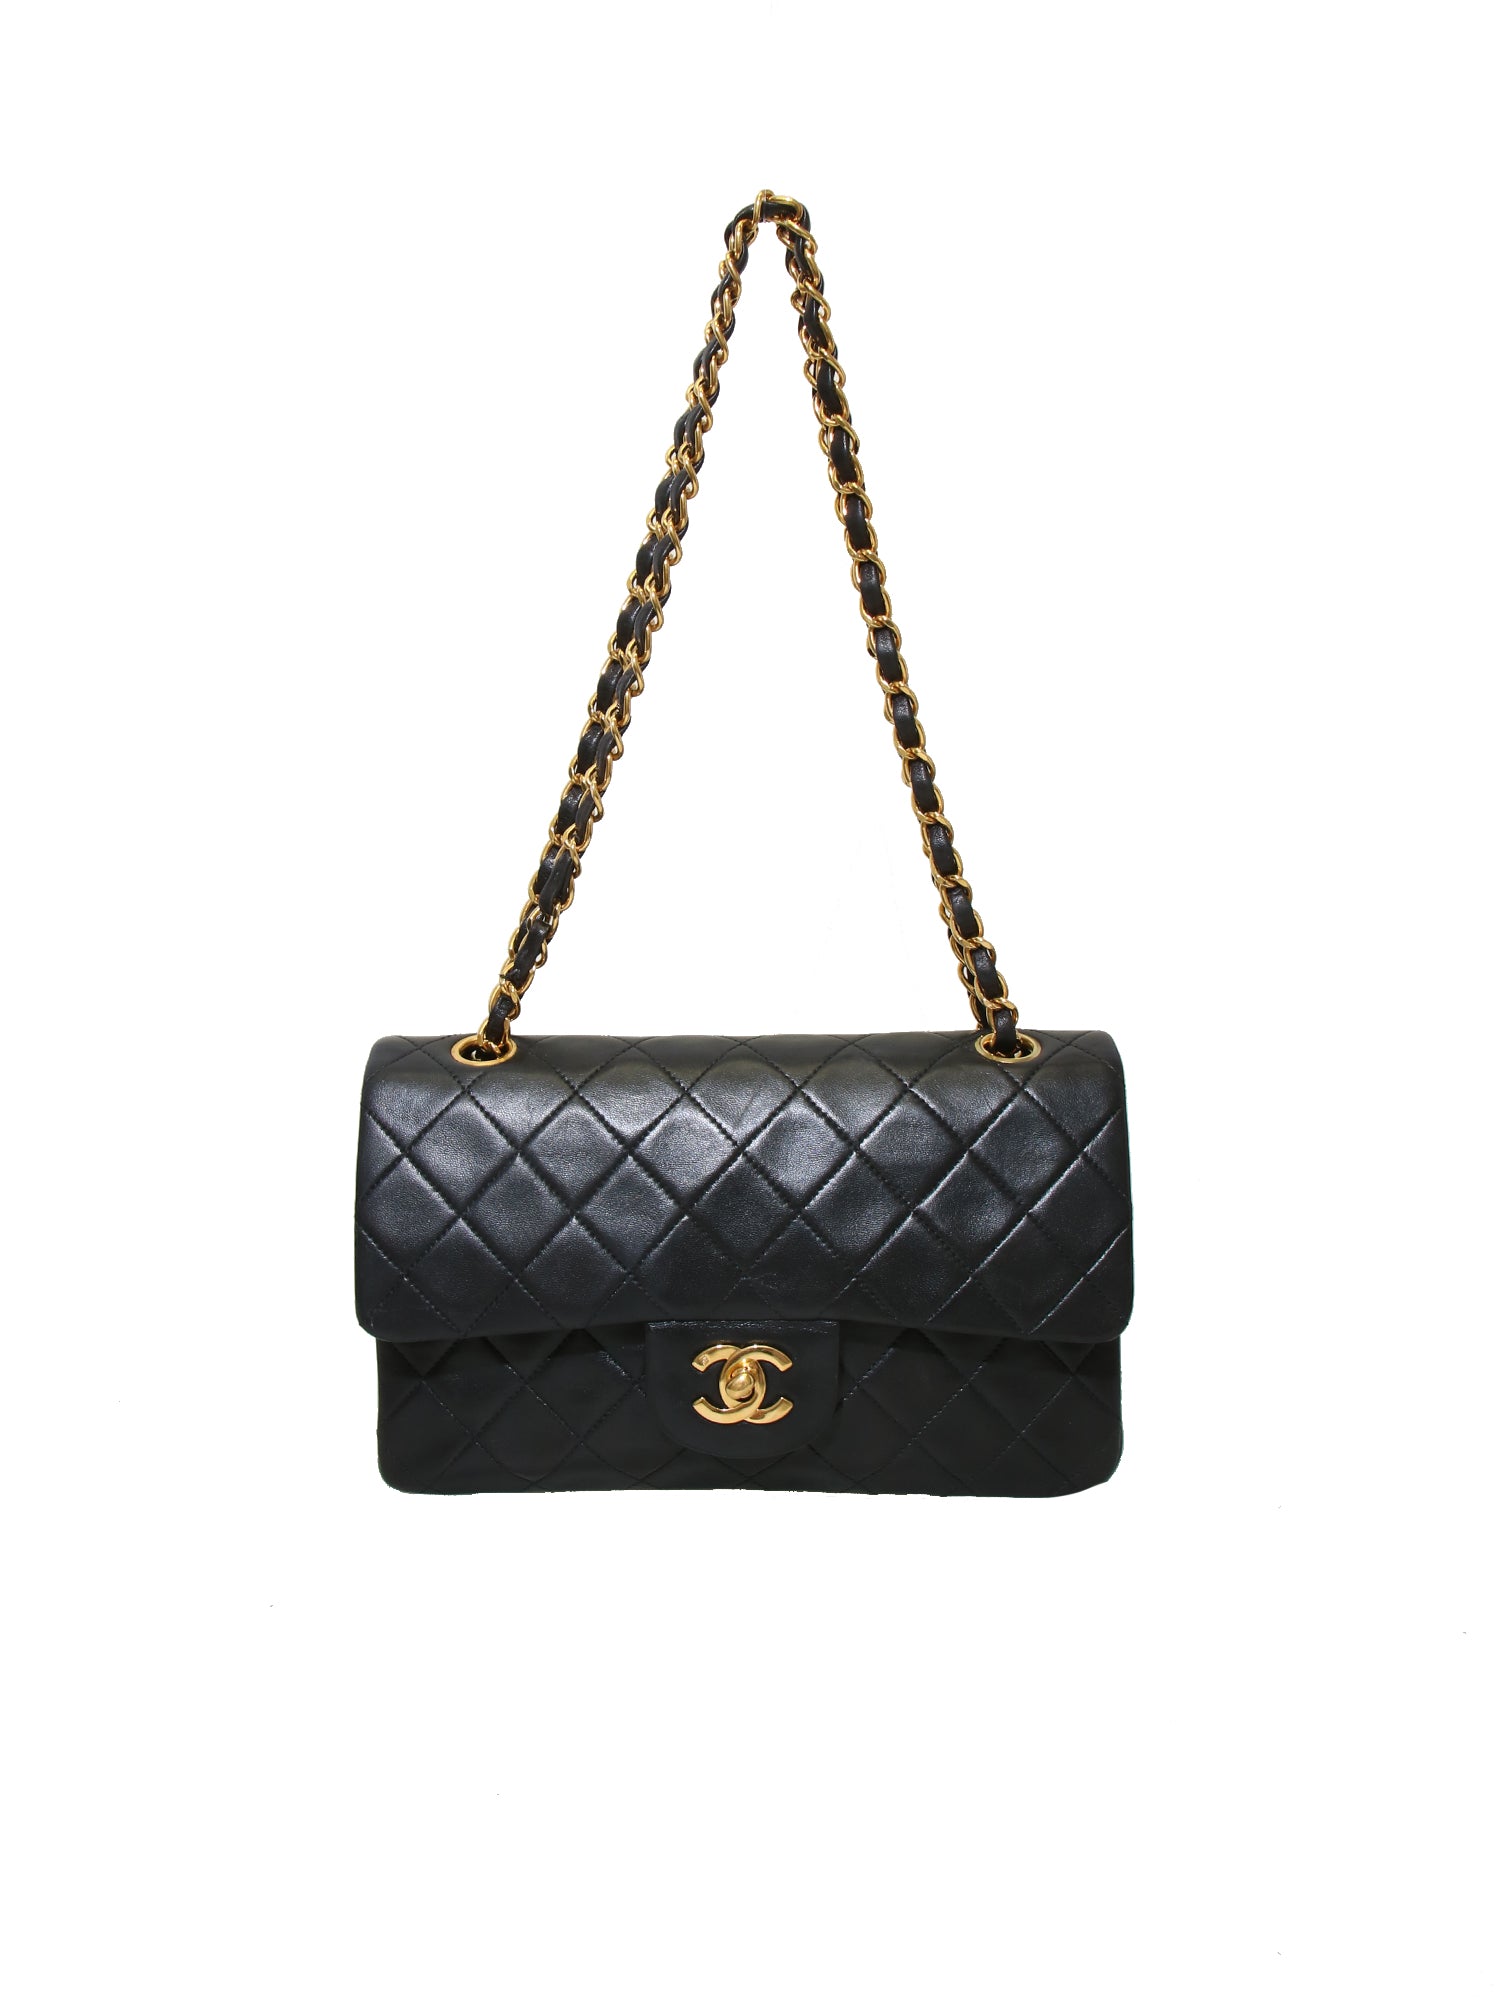 Saving for Chanel — Signature Style